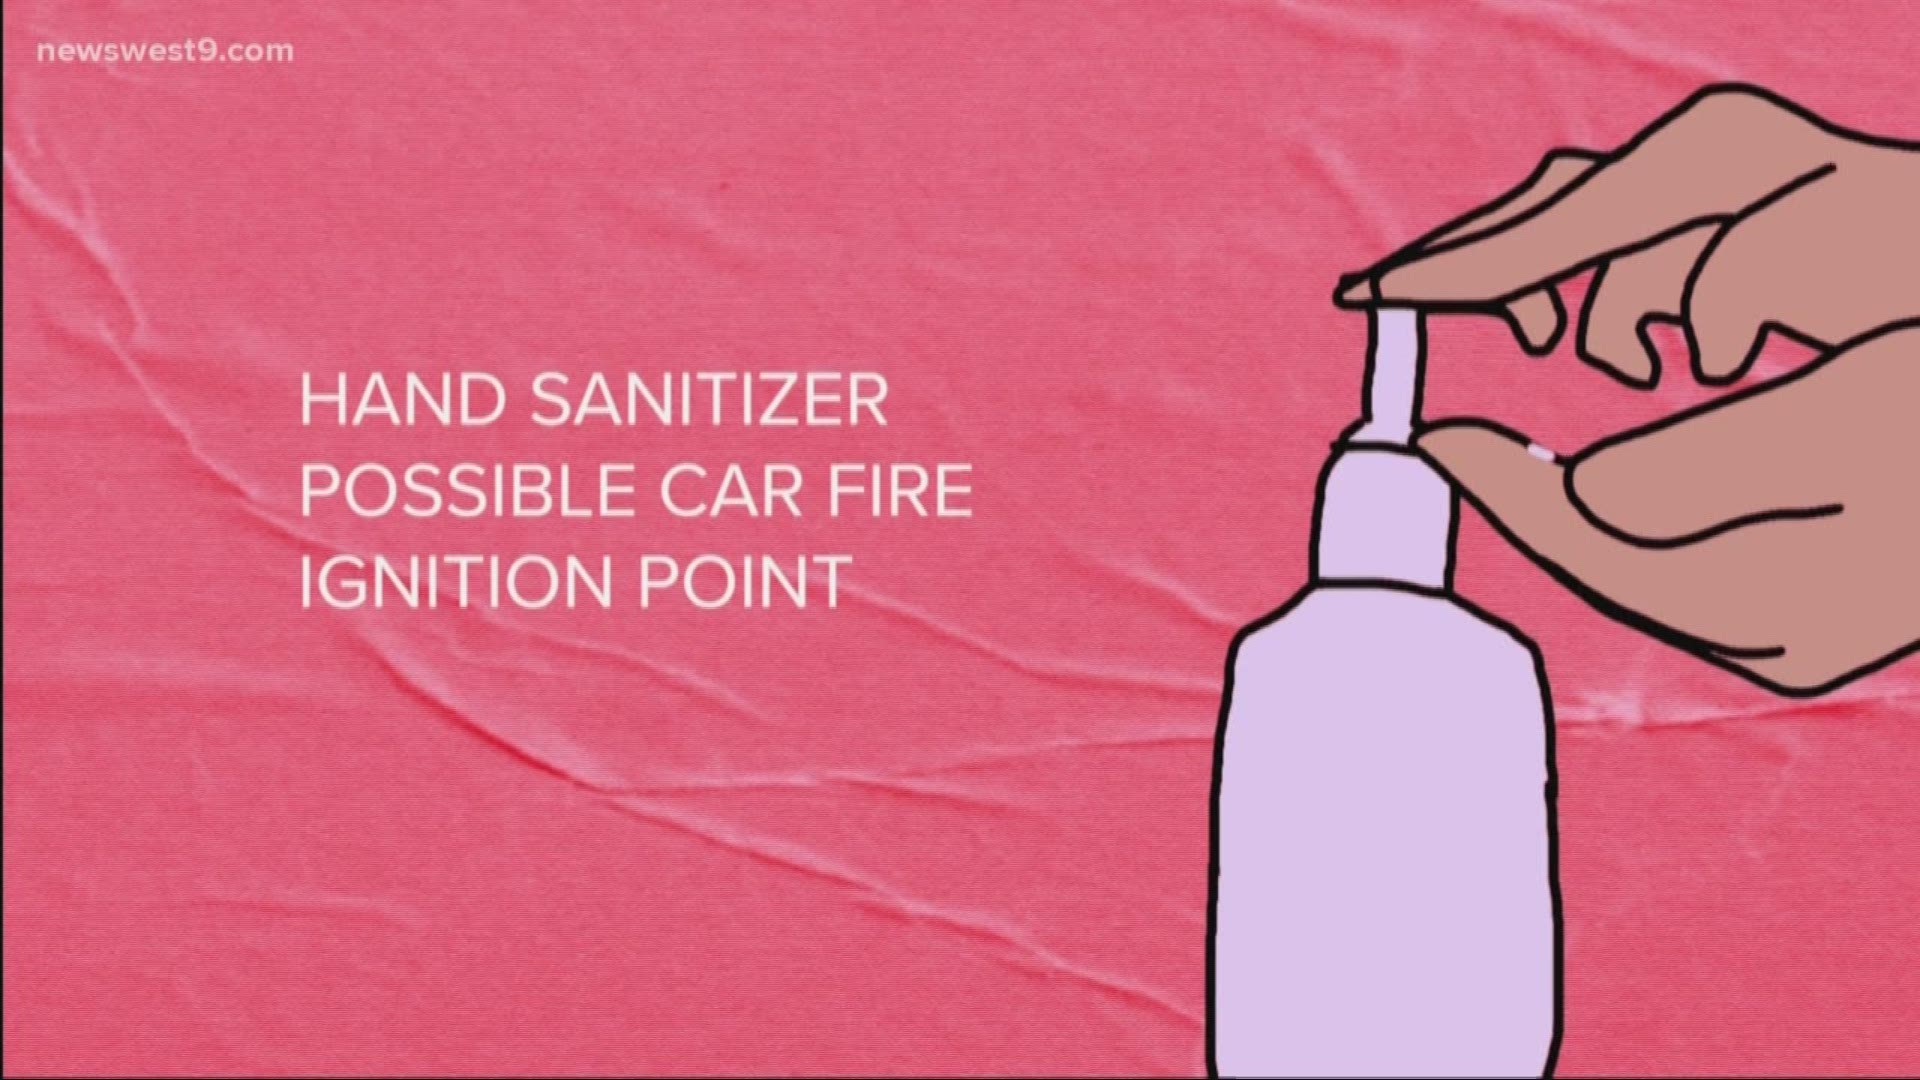 While it's not common, the West Texas heat and things like hand sanitizer and hairspray can cause your car to catch fire.